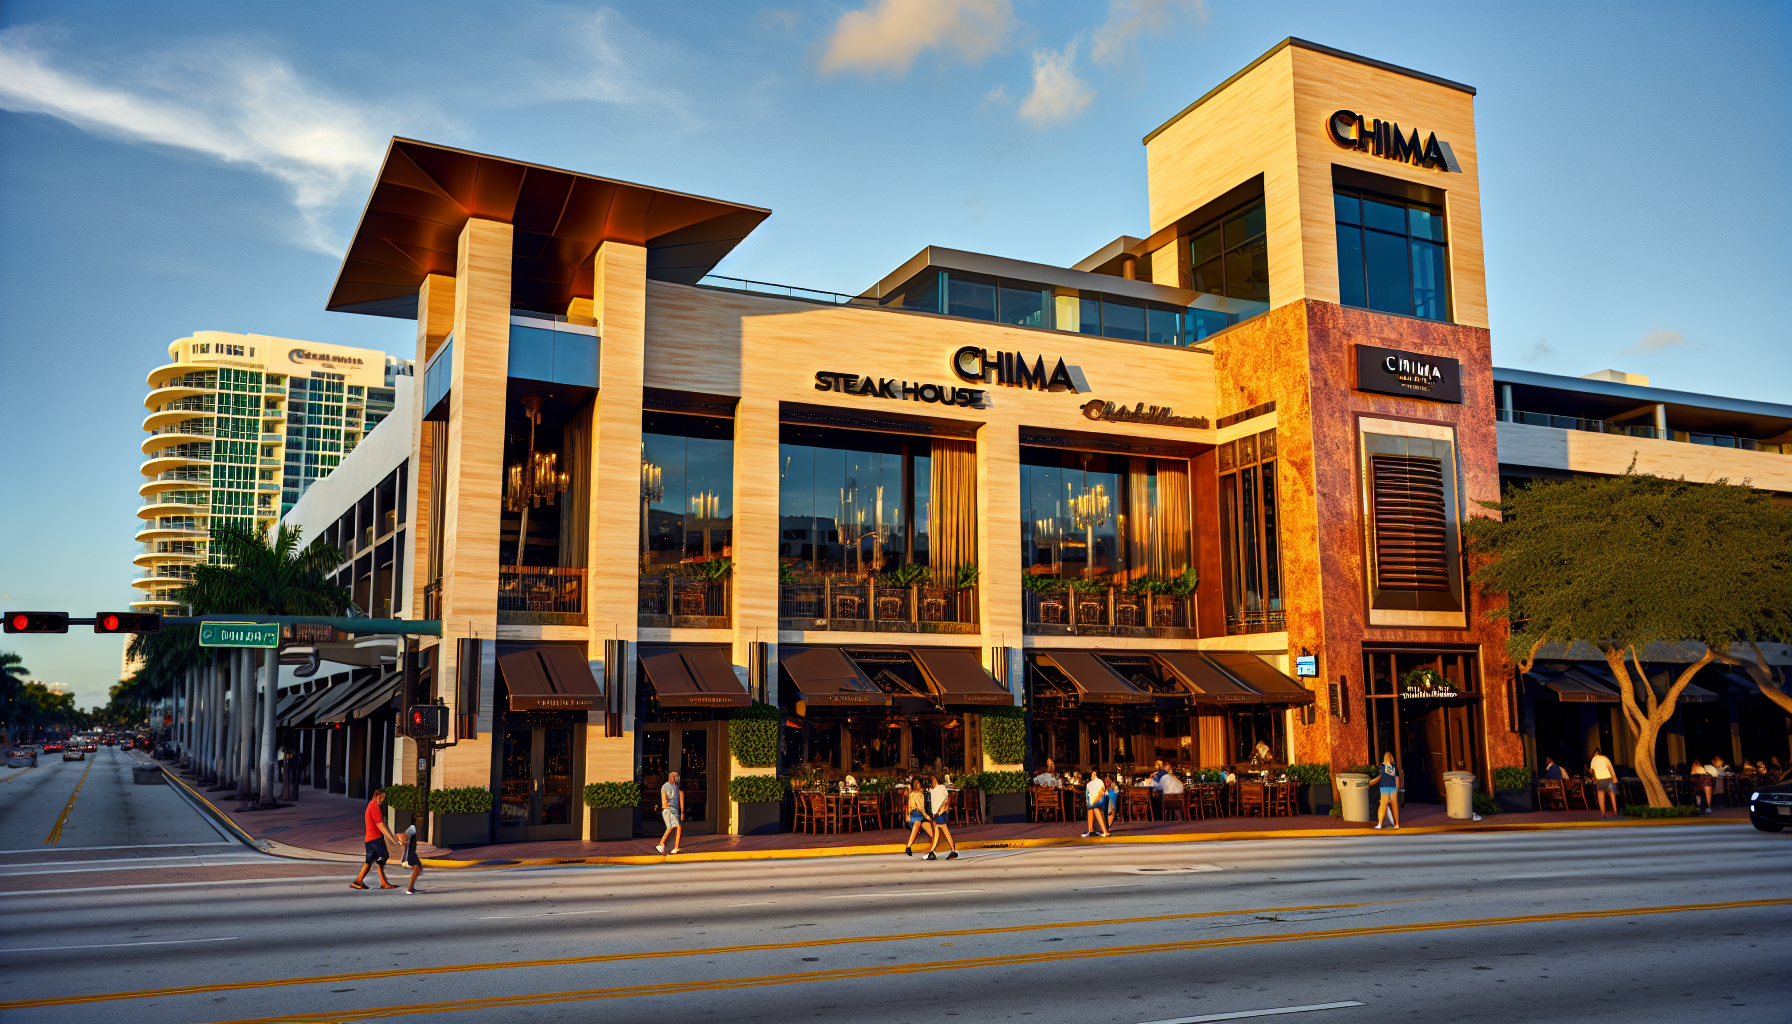 Exterior of Chima Steakhouse on Las Olas Boulevard in Fort Lauderdale